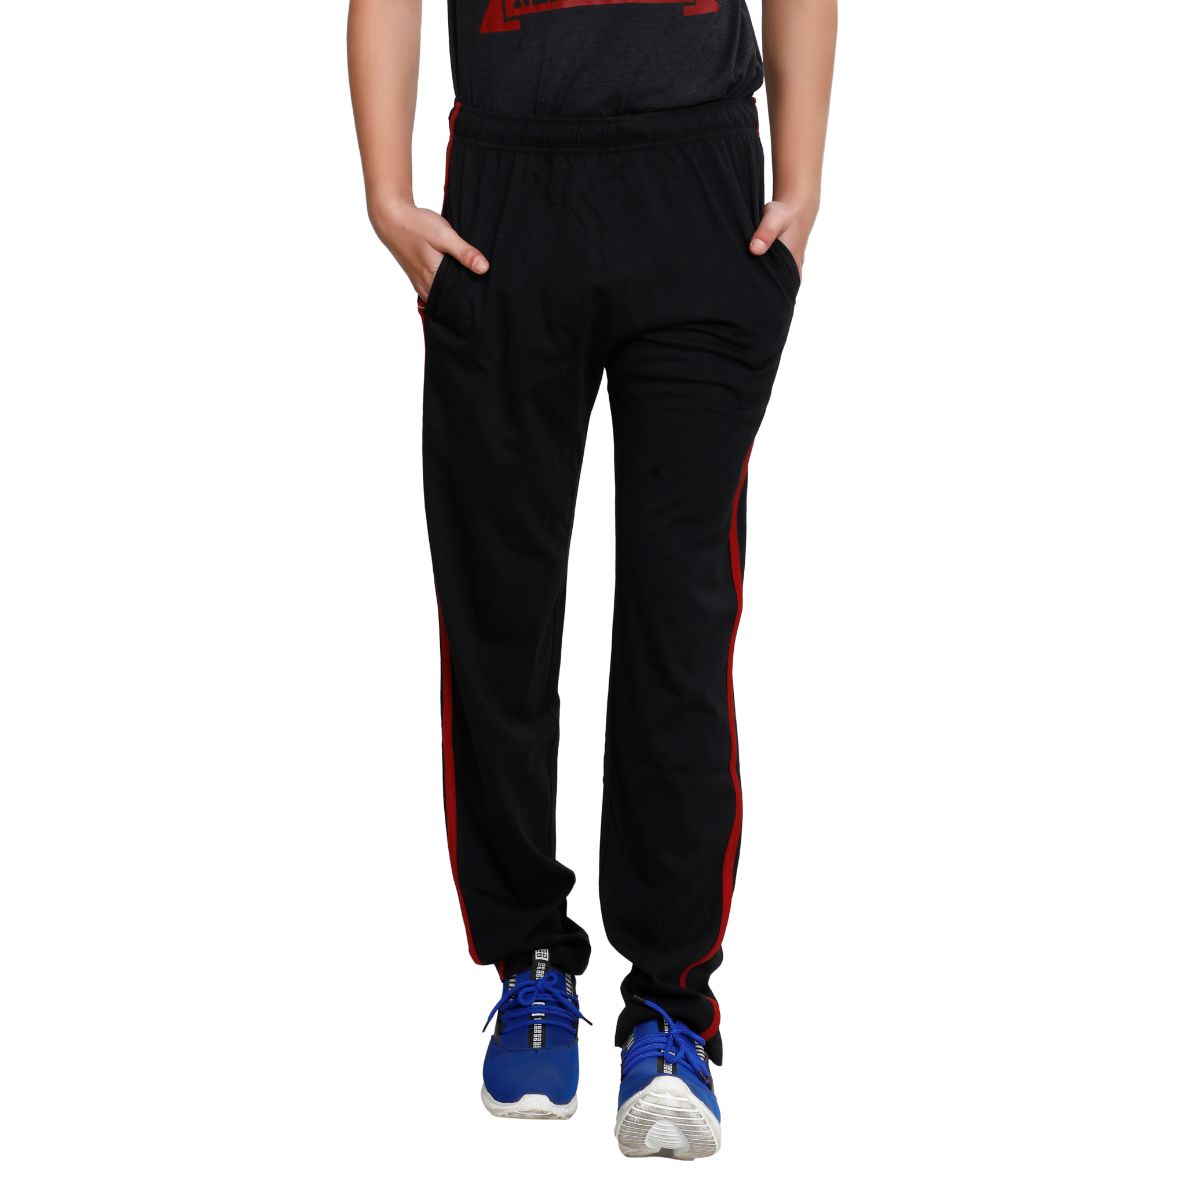 summer track pant for men cotton loose fit, stretchy, comfortable &  quick-drying for running, jogging,